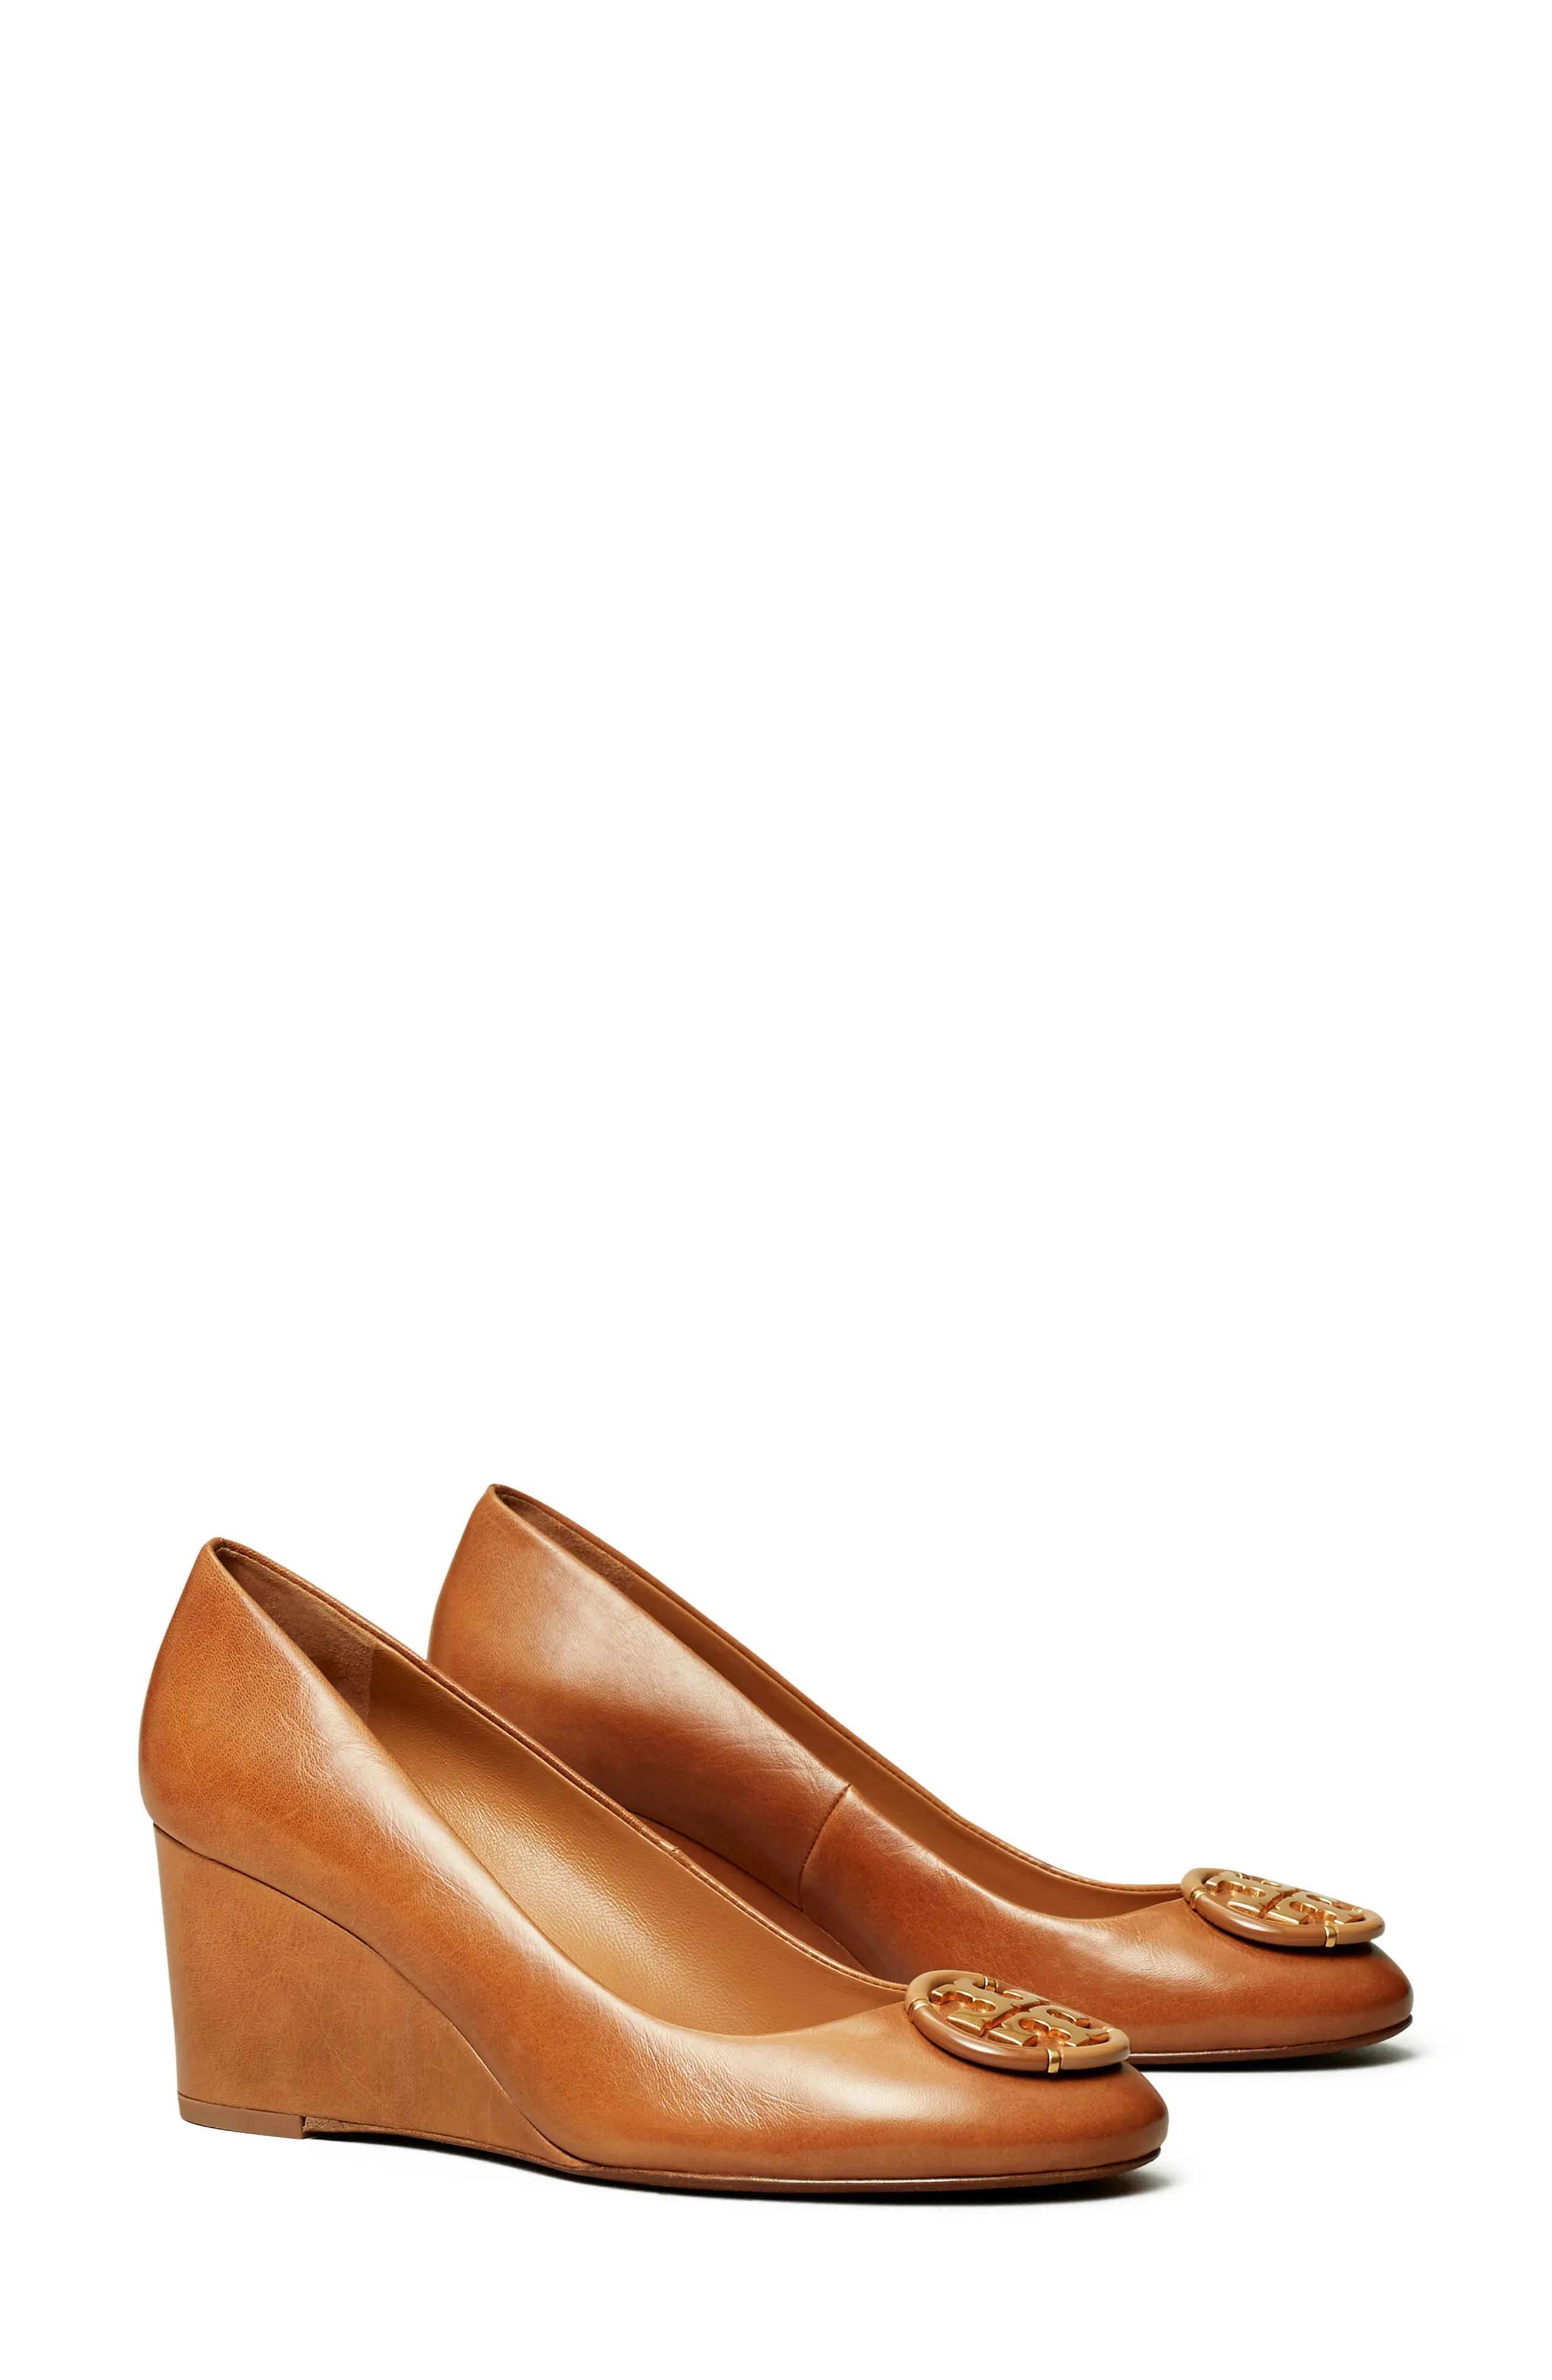 Tory Burch Logo Medallion Wedge Pump, Size 11 in Tan at Nordstrom | Nordstrom